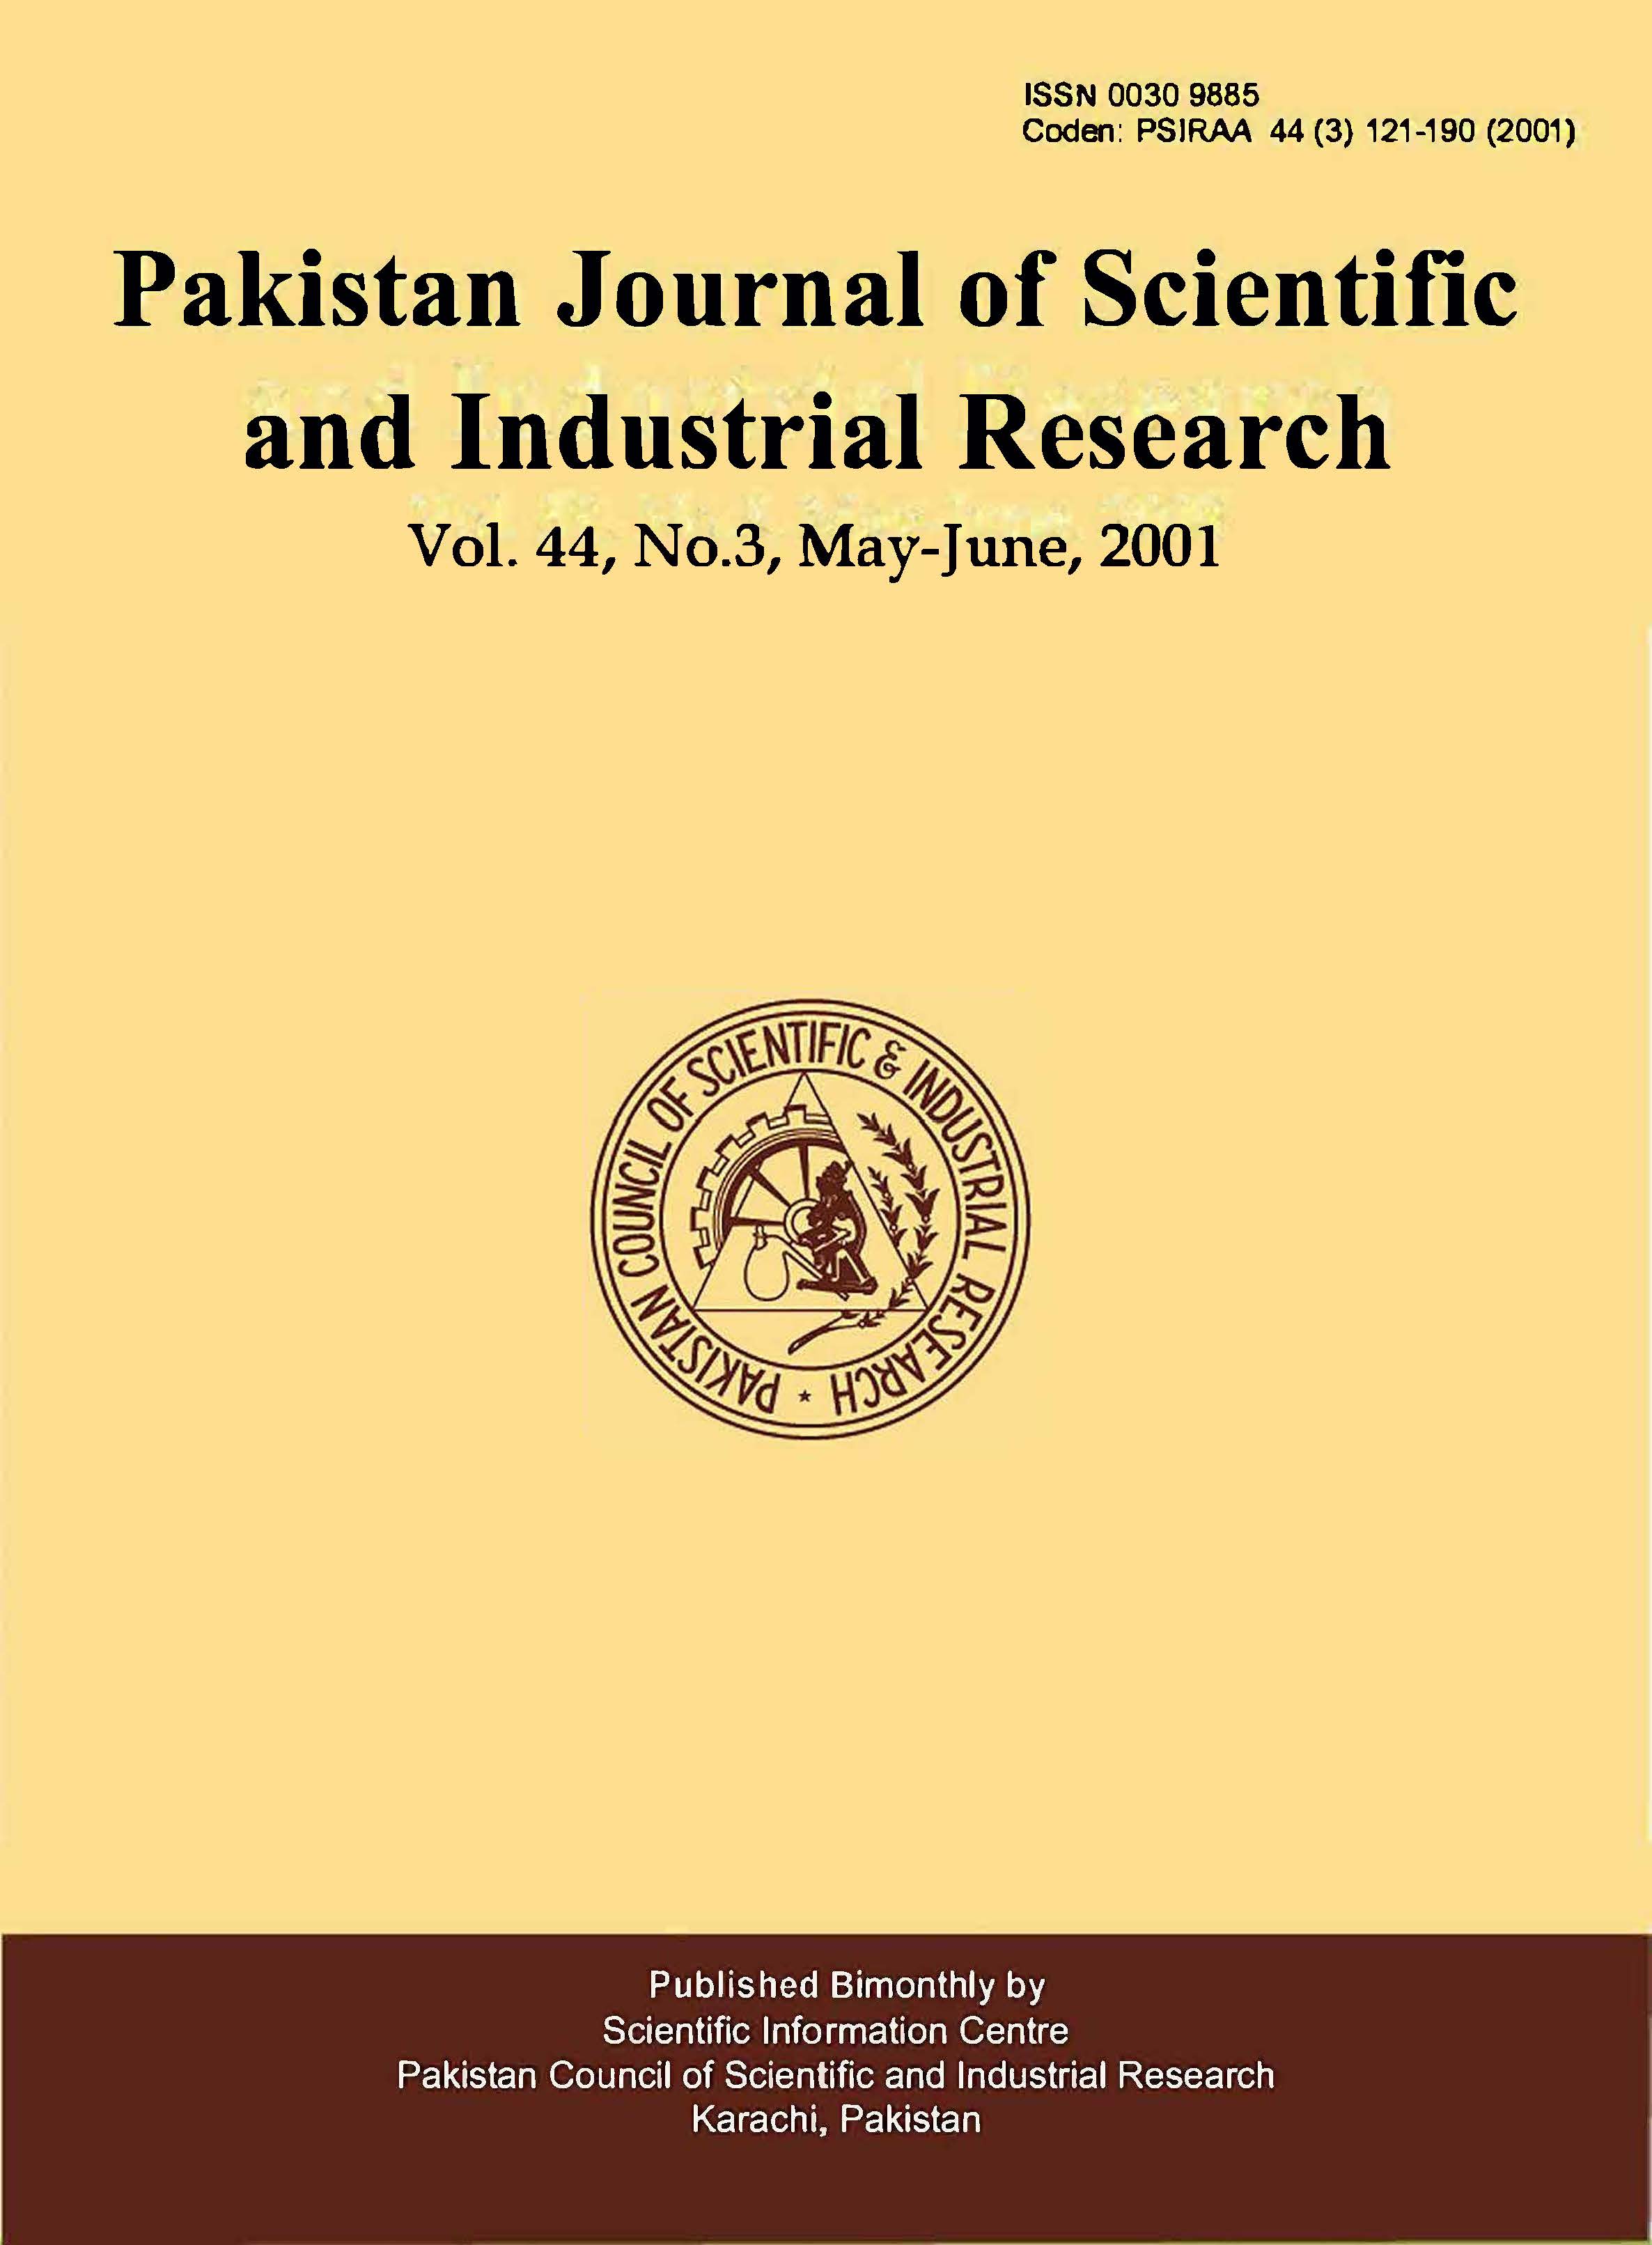 					View Vol. 44 No. 3 (2001): Pakistan Journal of Scientific and Industrial Research
				